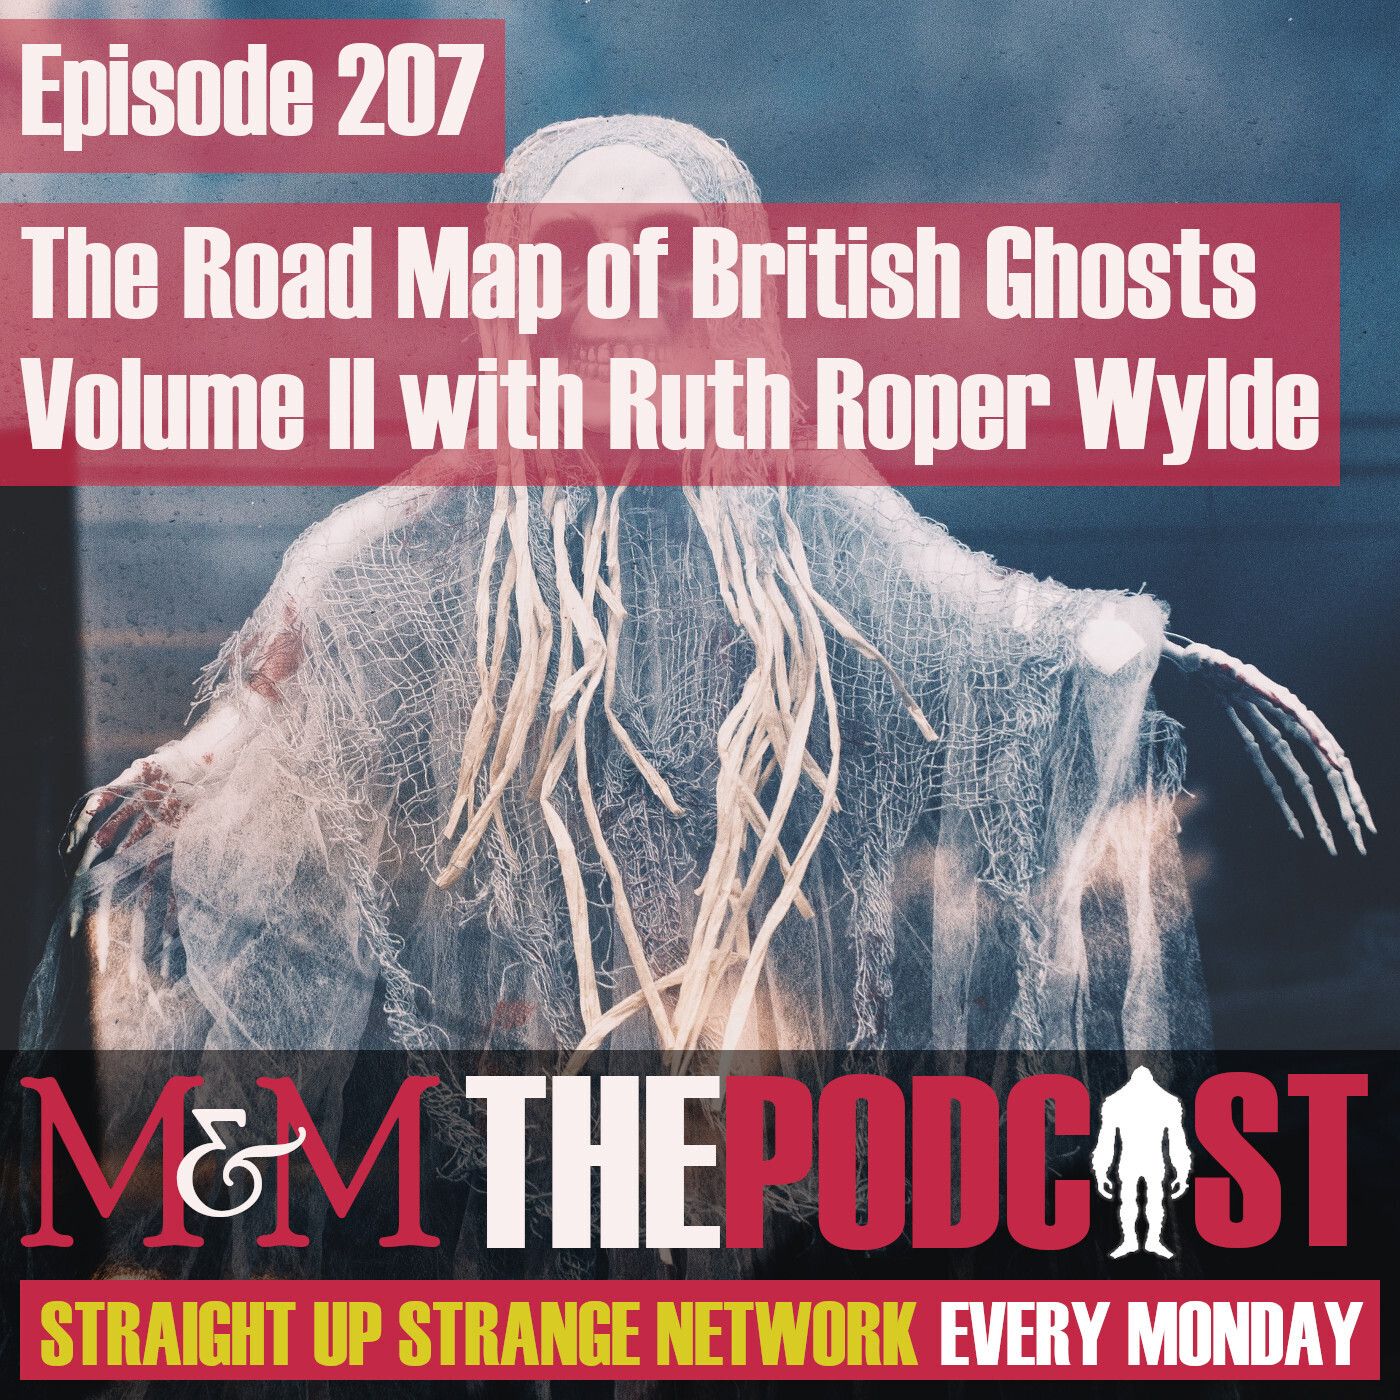 Mysteries and Monsters: Episode 207 The Road Map of British Ghosts Volume Two with Ruth Roper Wylde